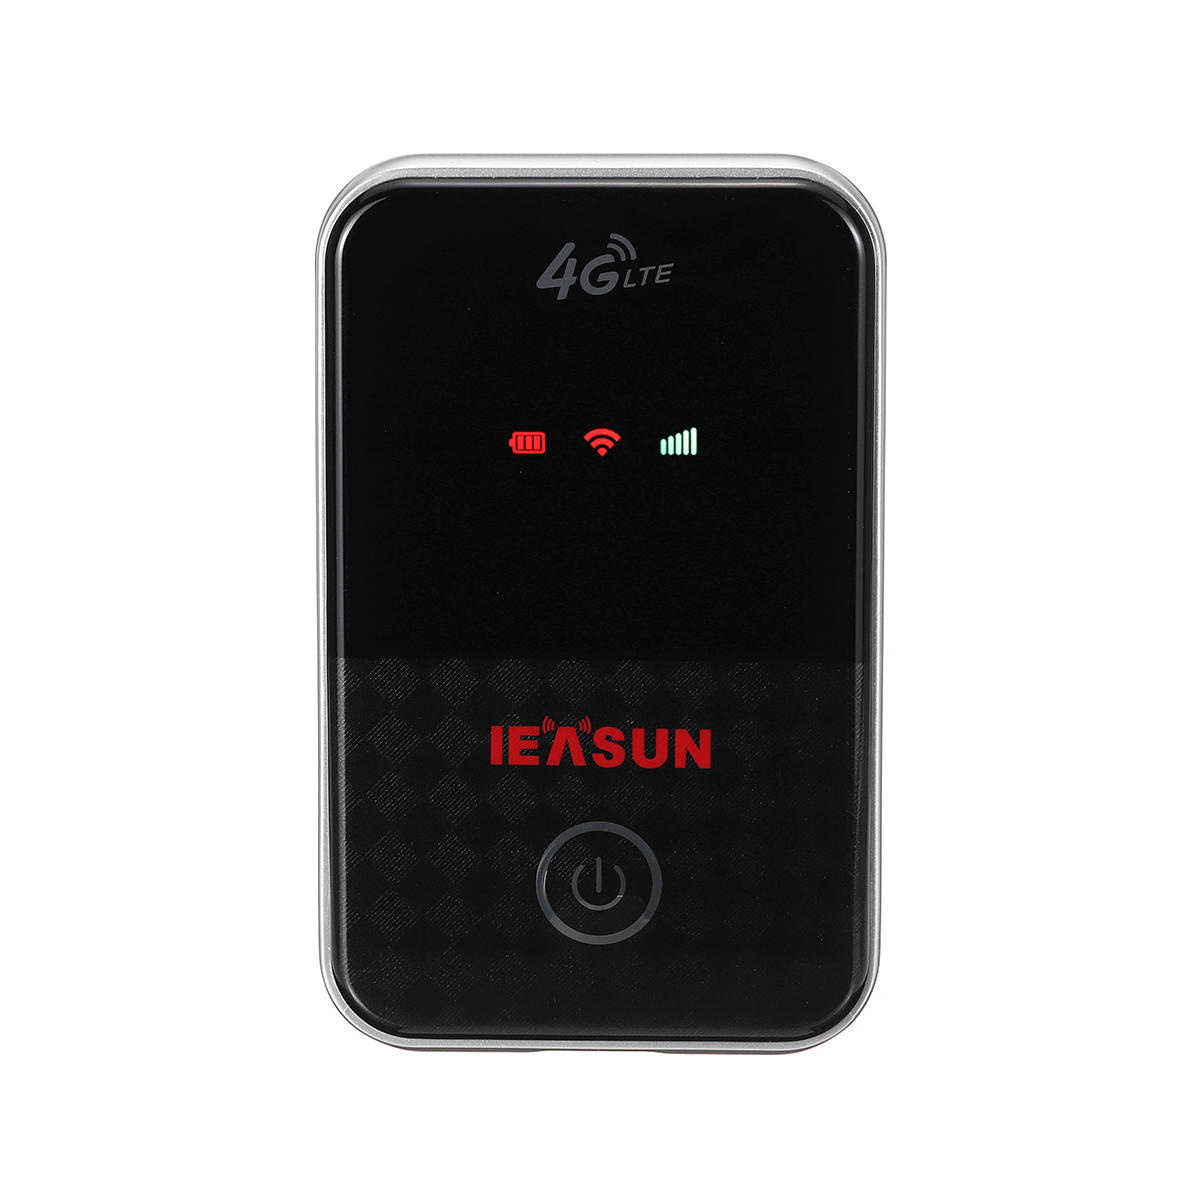 

Wireless Portable Pocket Router Portable Pocket Wifi FDD B1 B3 B7 B8 B20 WCDMA B1 B5 B8 standard sim card 150mbps